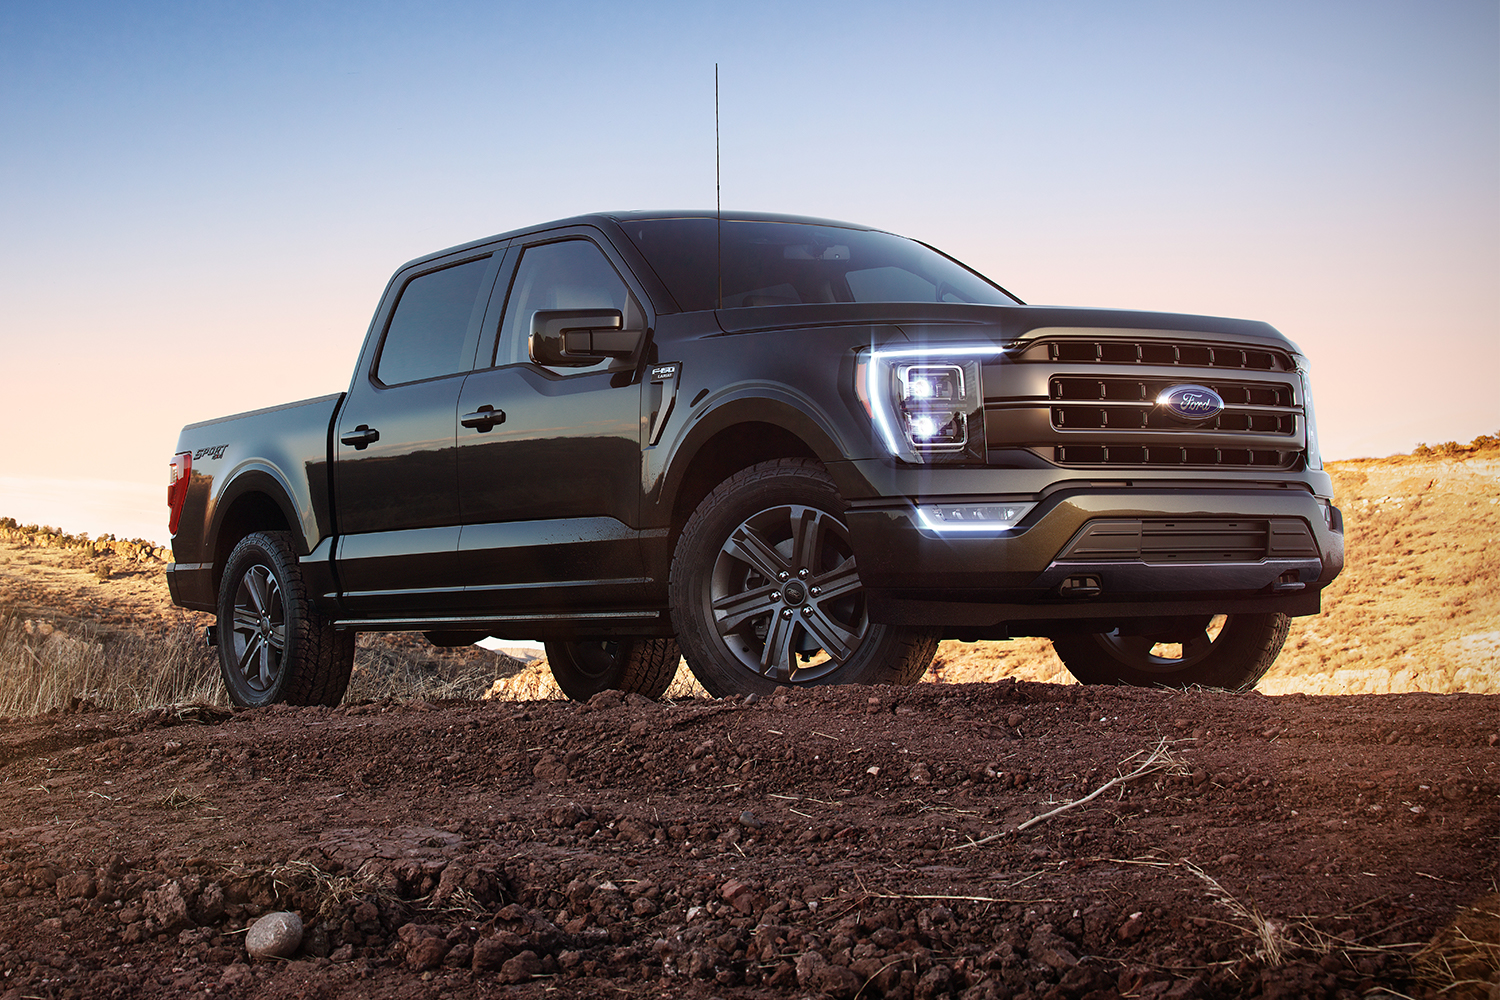 The new 2021 Ford F-150 pickup truck